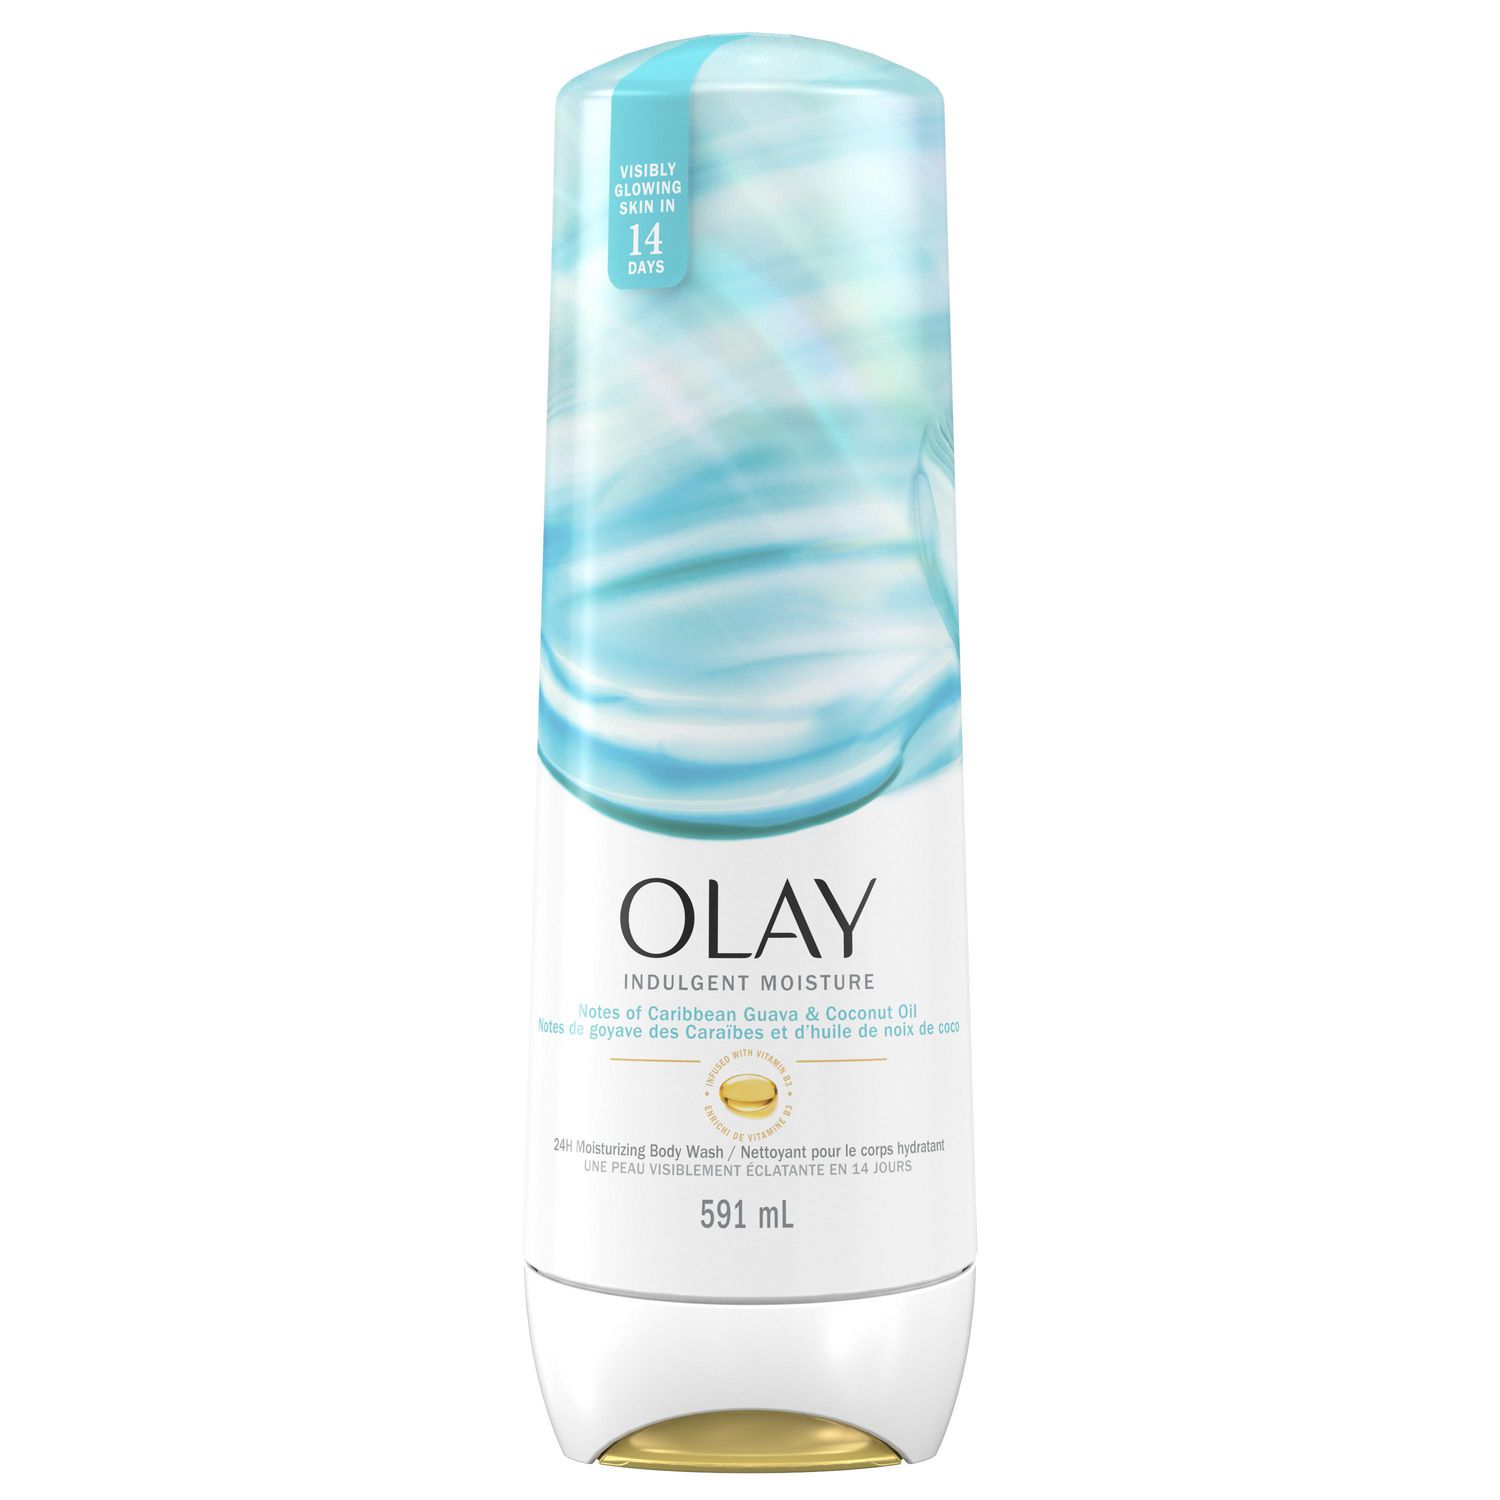 Olay Indulgent Moisture Body Wash Infused with Vitamin B3, Notes